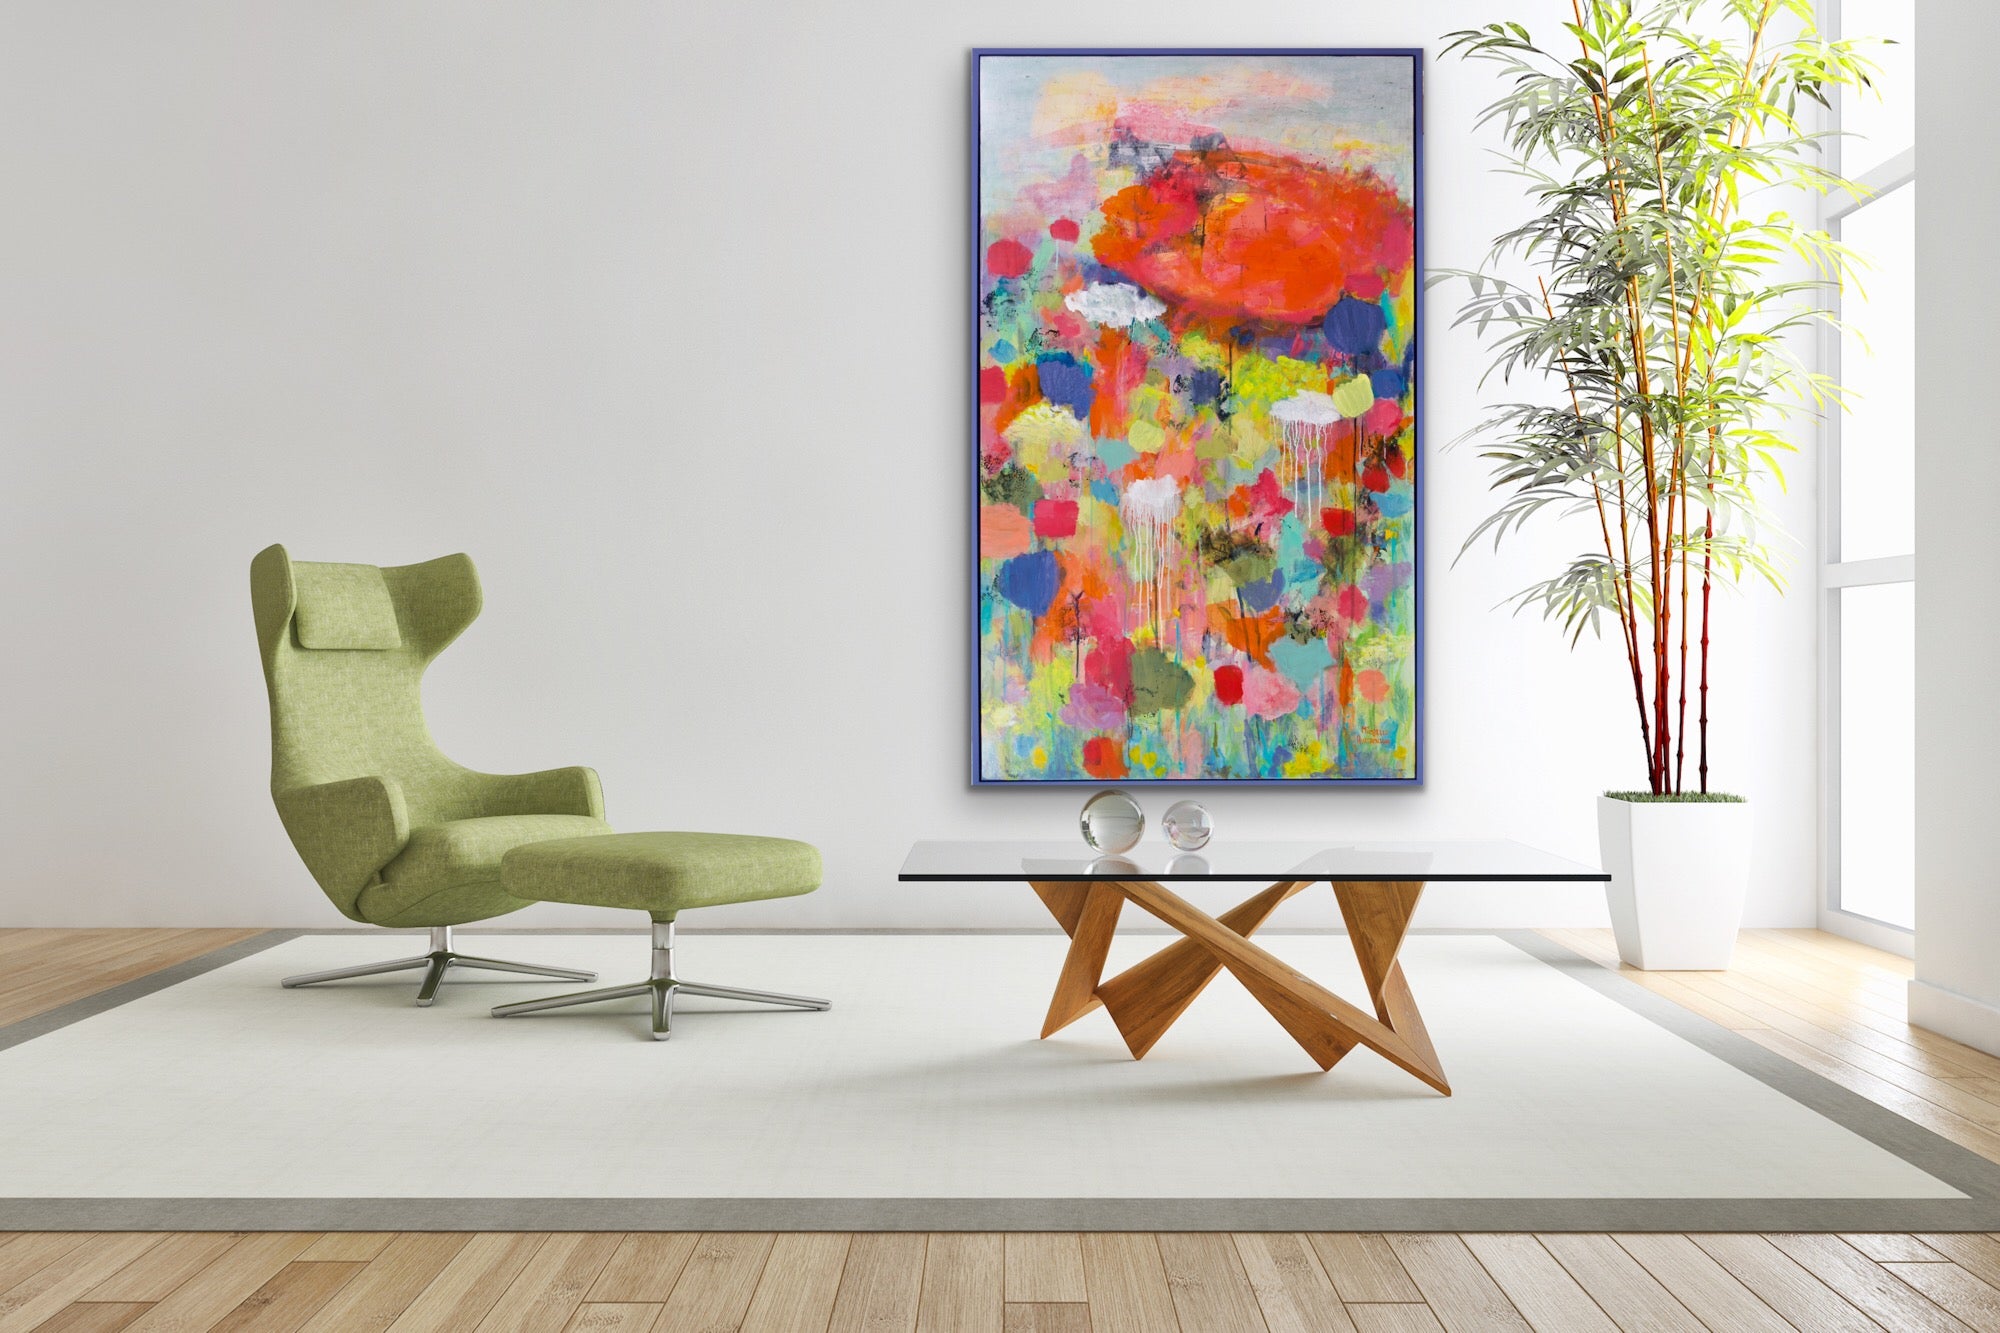 Painting shown beside a chartreuse/sage green chair above a coffee table.